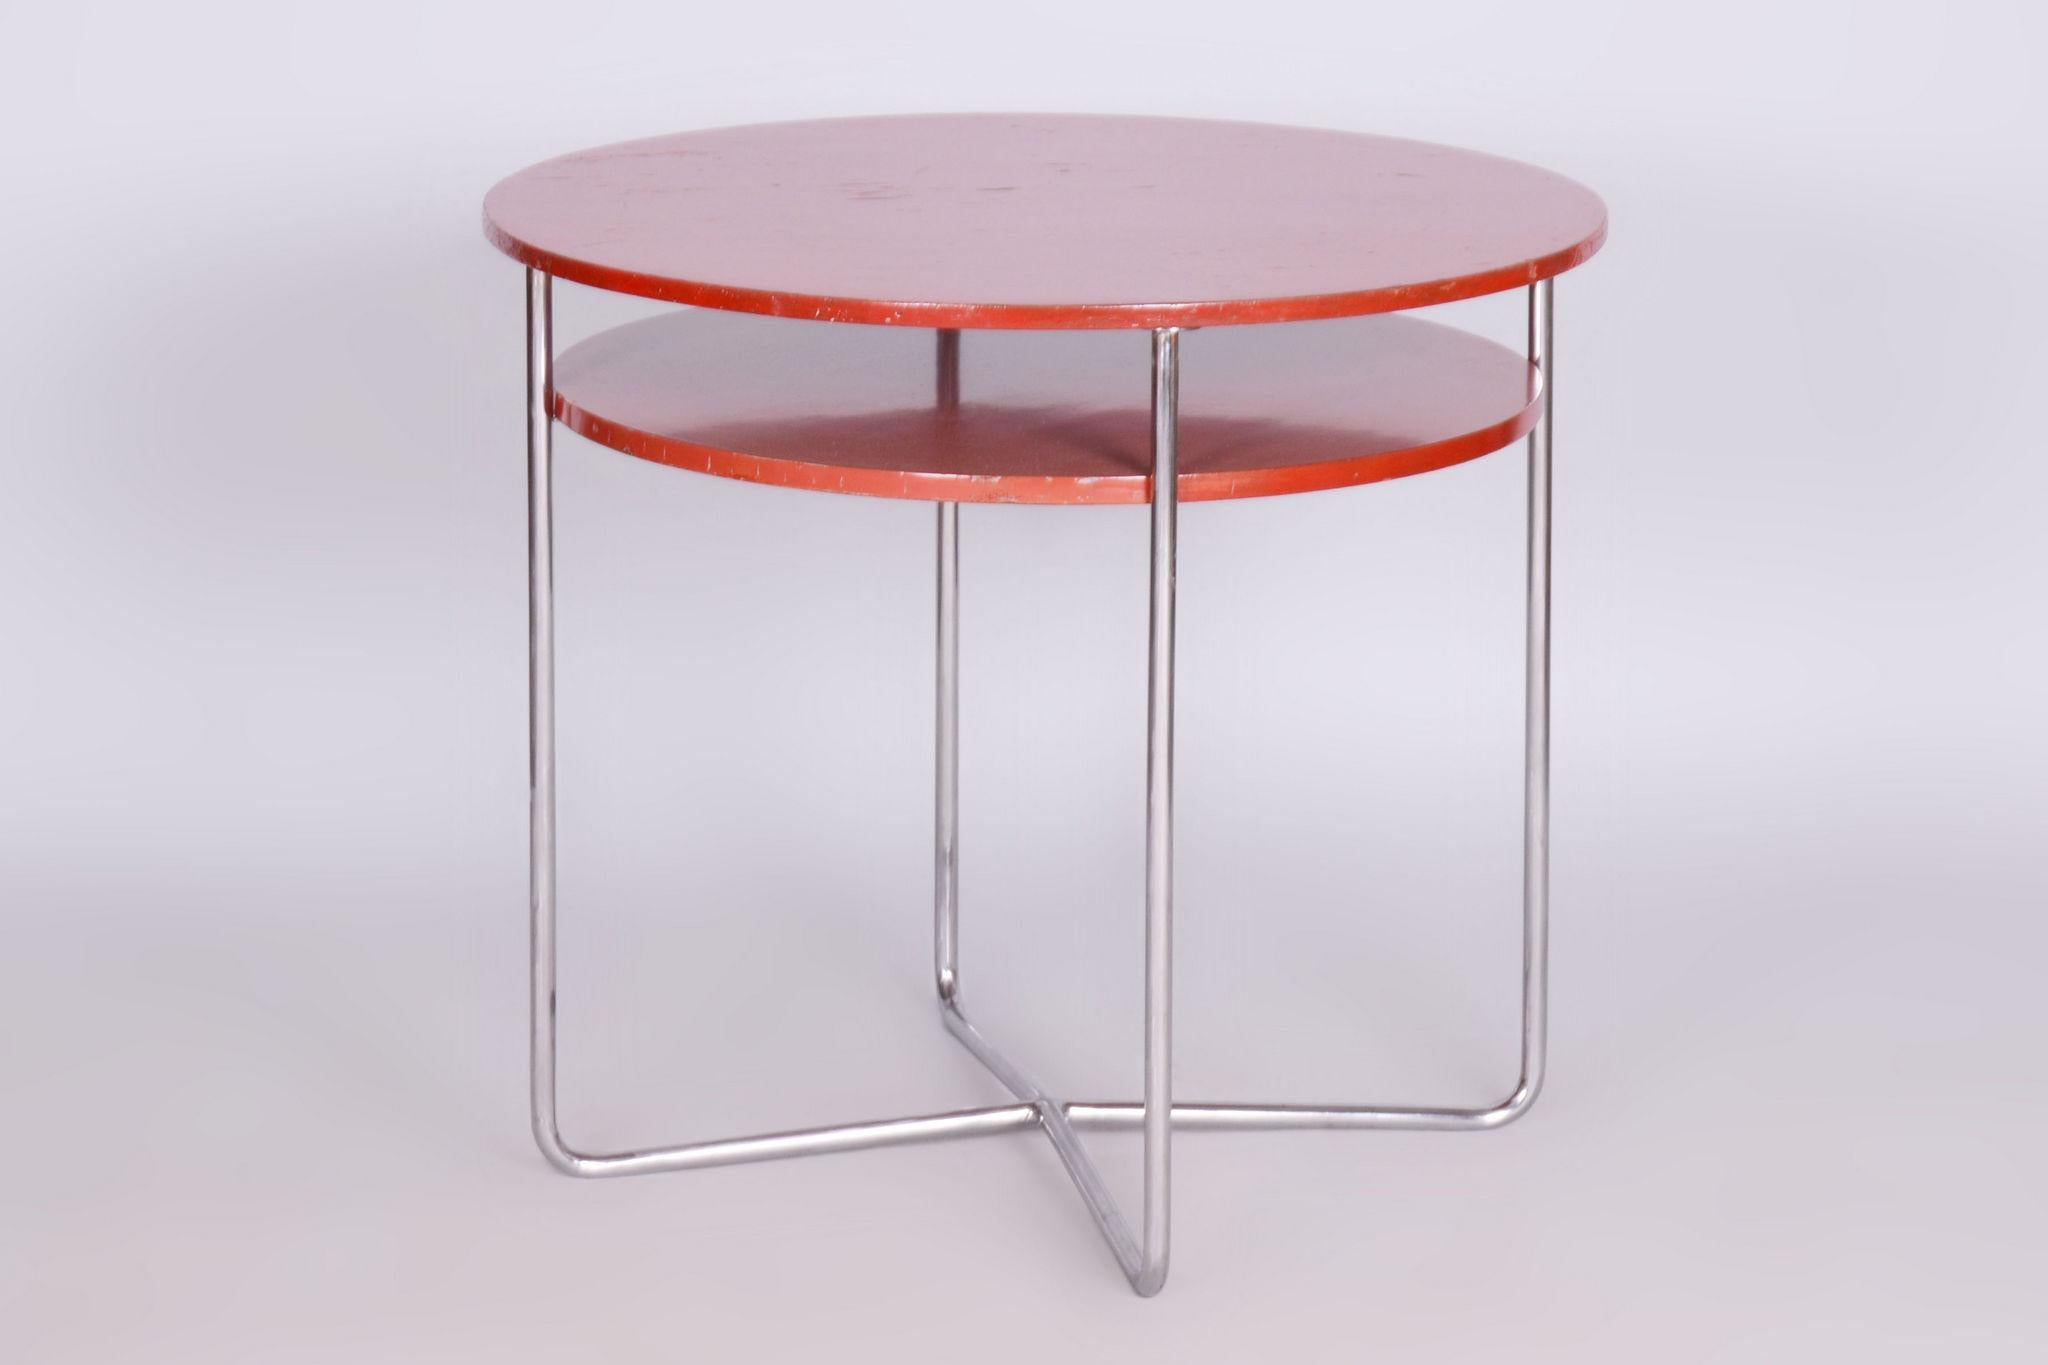 Restored Bauhaus Small Round Table, Chrome-Plated Steel, Czechia, 1930s For Sale 6